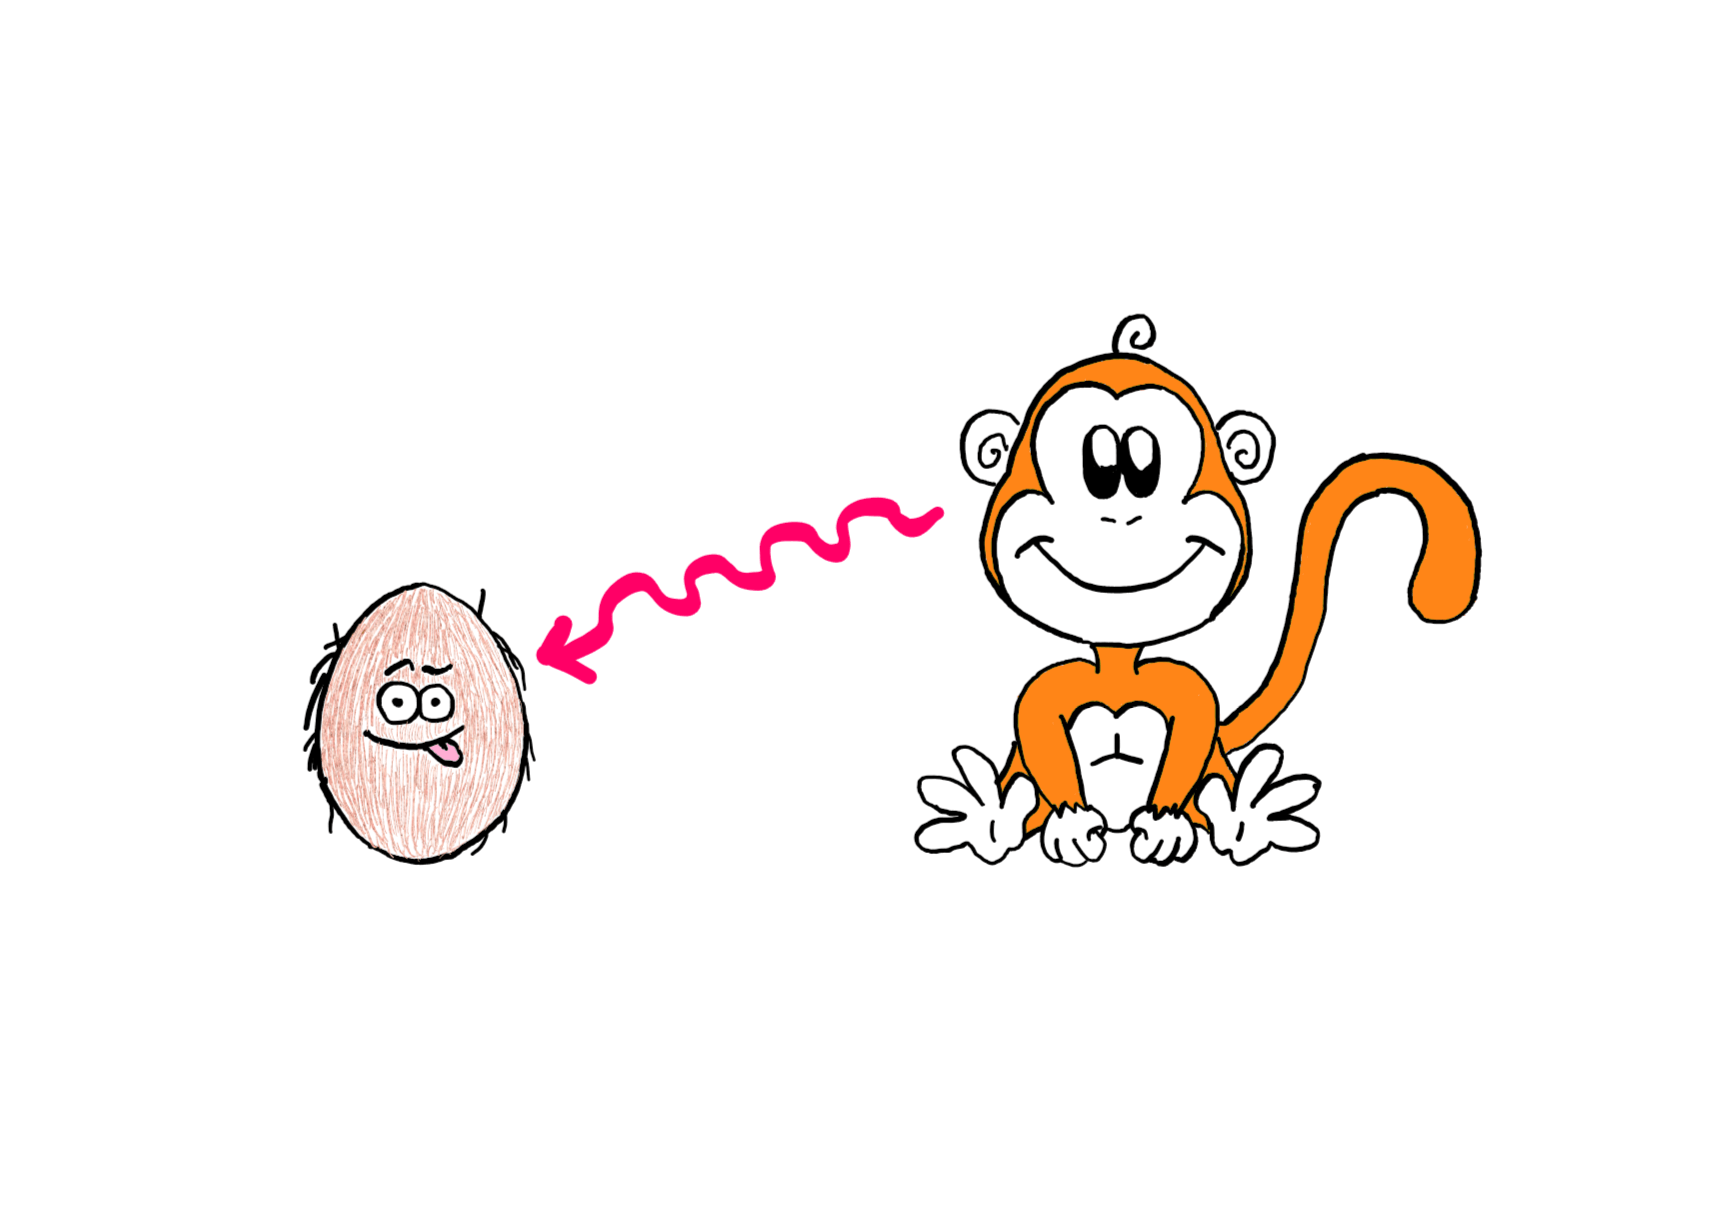 How To Really Solve The Last Coconut Puzzle - An illustration showing a cute little monkey sitting on the right like a baby. On the right, you see a goofy and cute looking coconut with eyes and its tongue sticking out. The monkey seems to be eyeing the coconut.